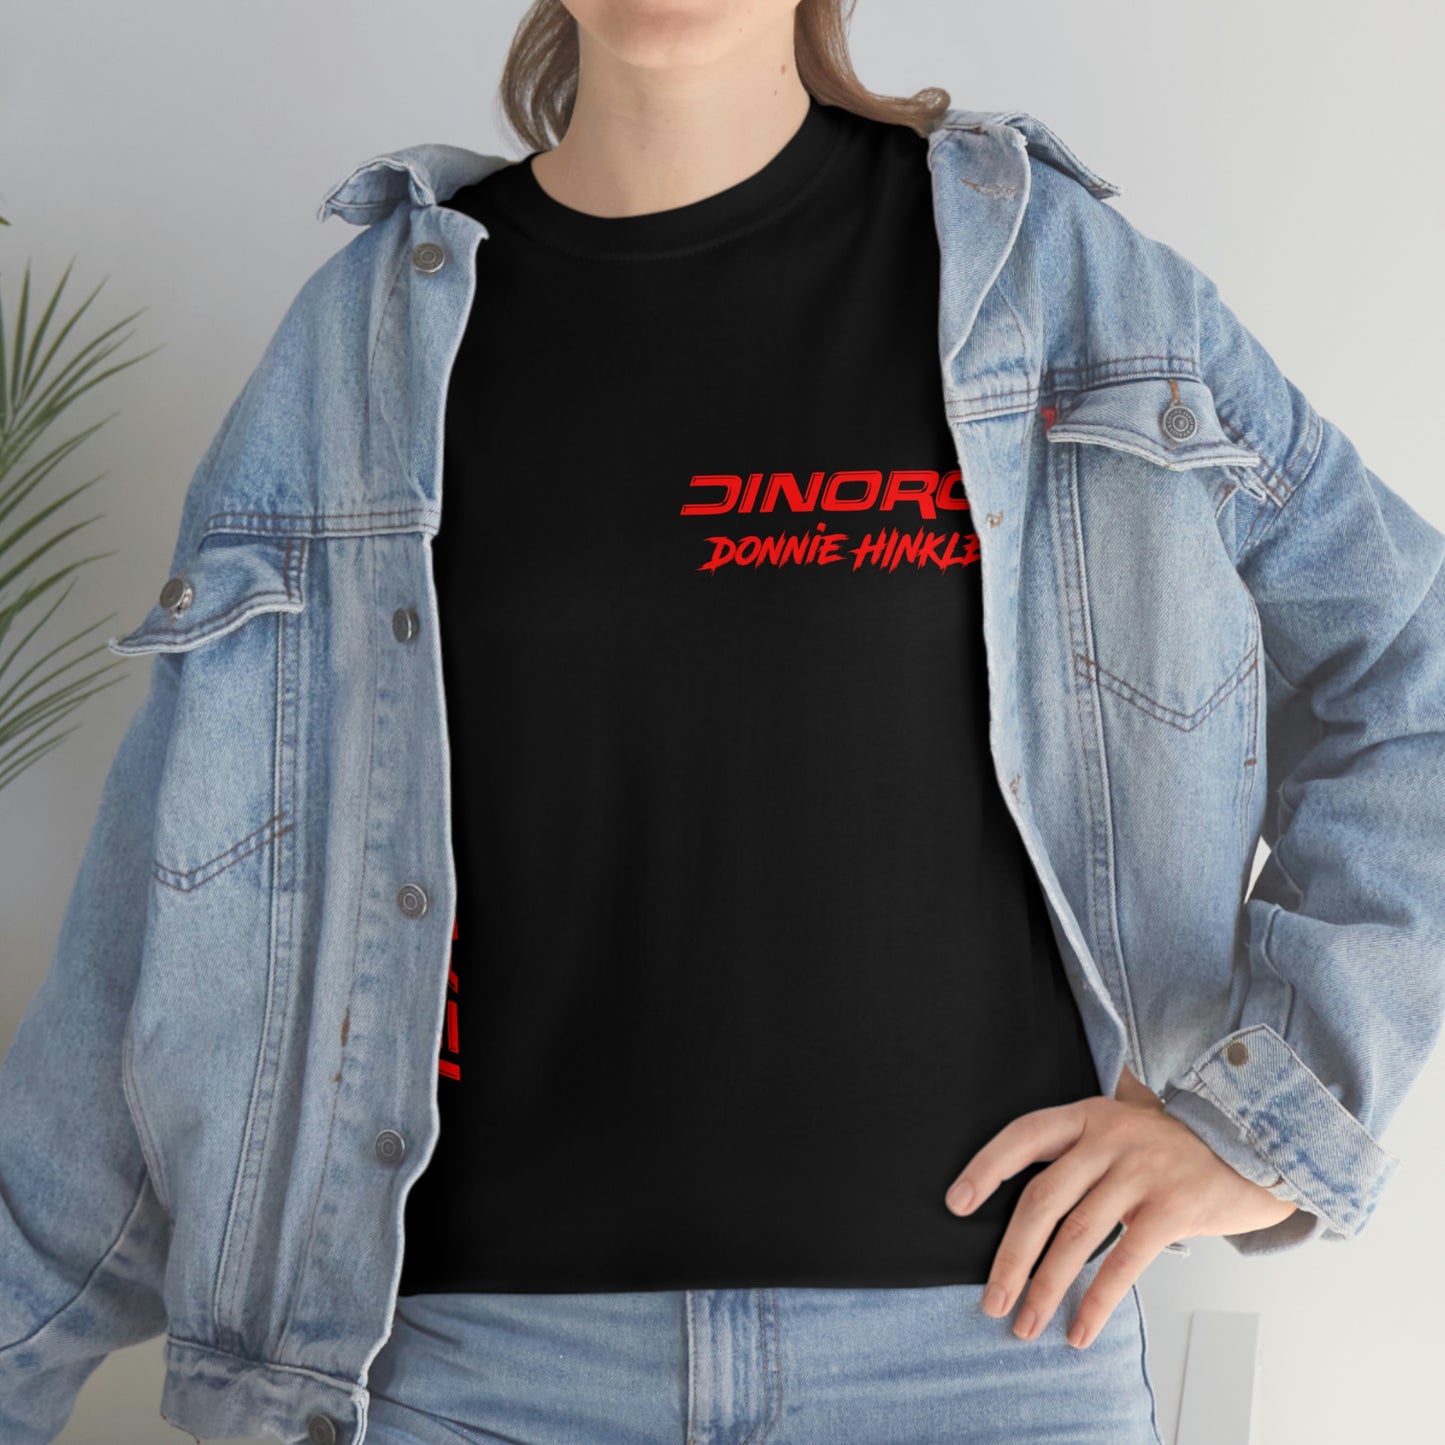 Team Driver Donnie Hinkle Front and Back DinoRc Logo T-Shirt S-5x 5 colors